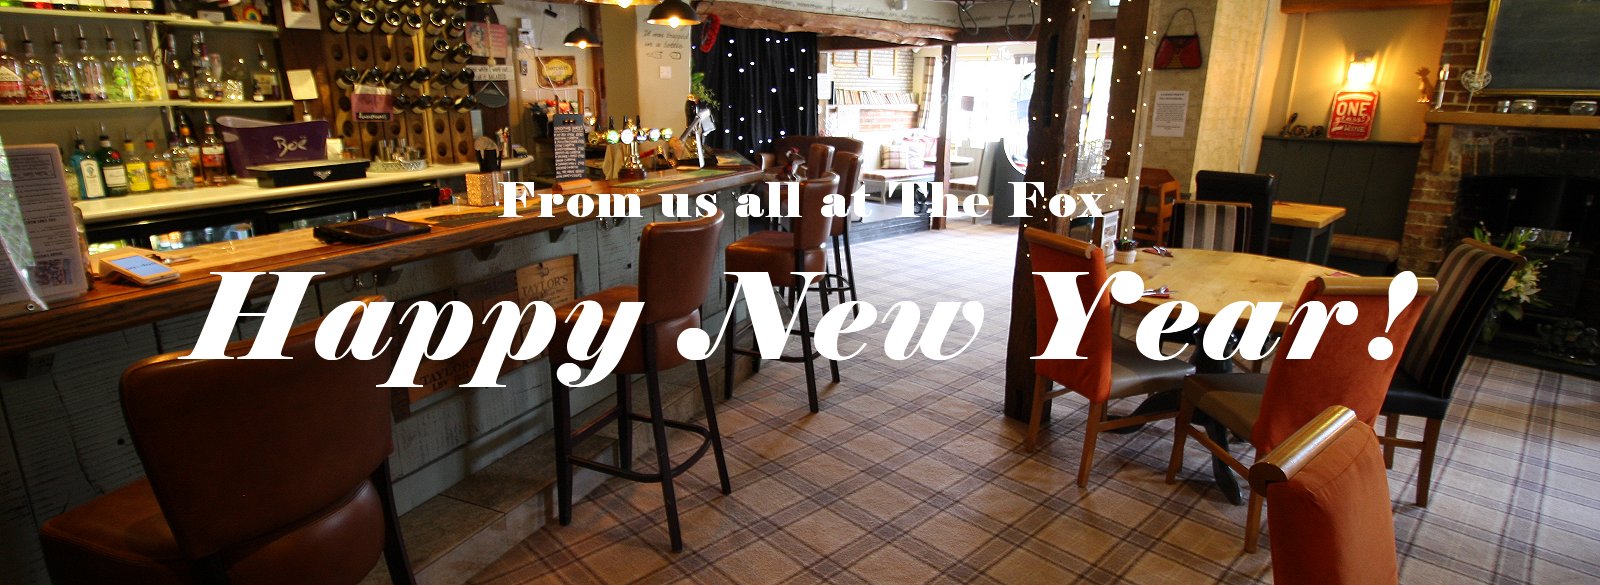 It's a new year at The Fox & Hounds, Wroughton, Swindon